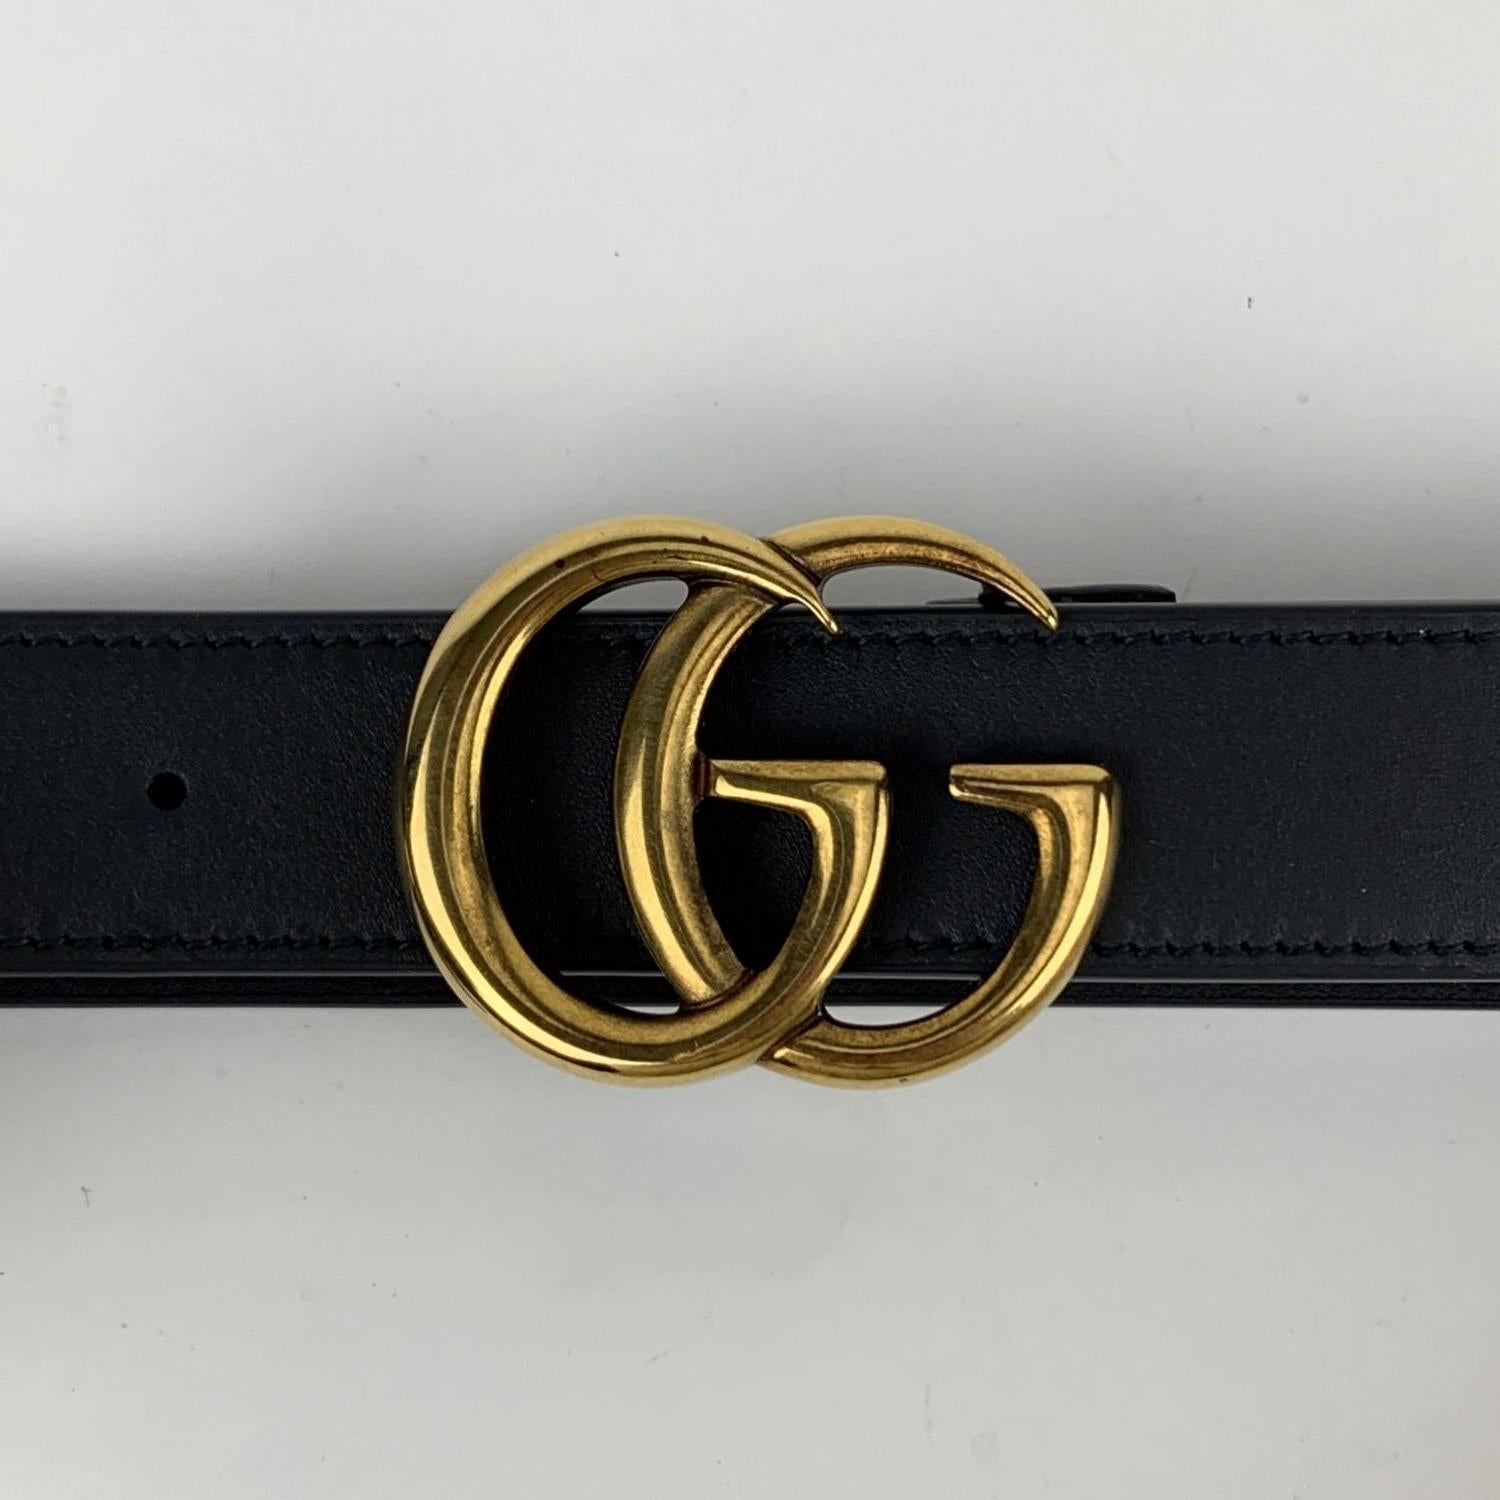 Women's or Men's Gucci Black Leather Marmont Belt with GG Buckle Size 75/30 Never Worn